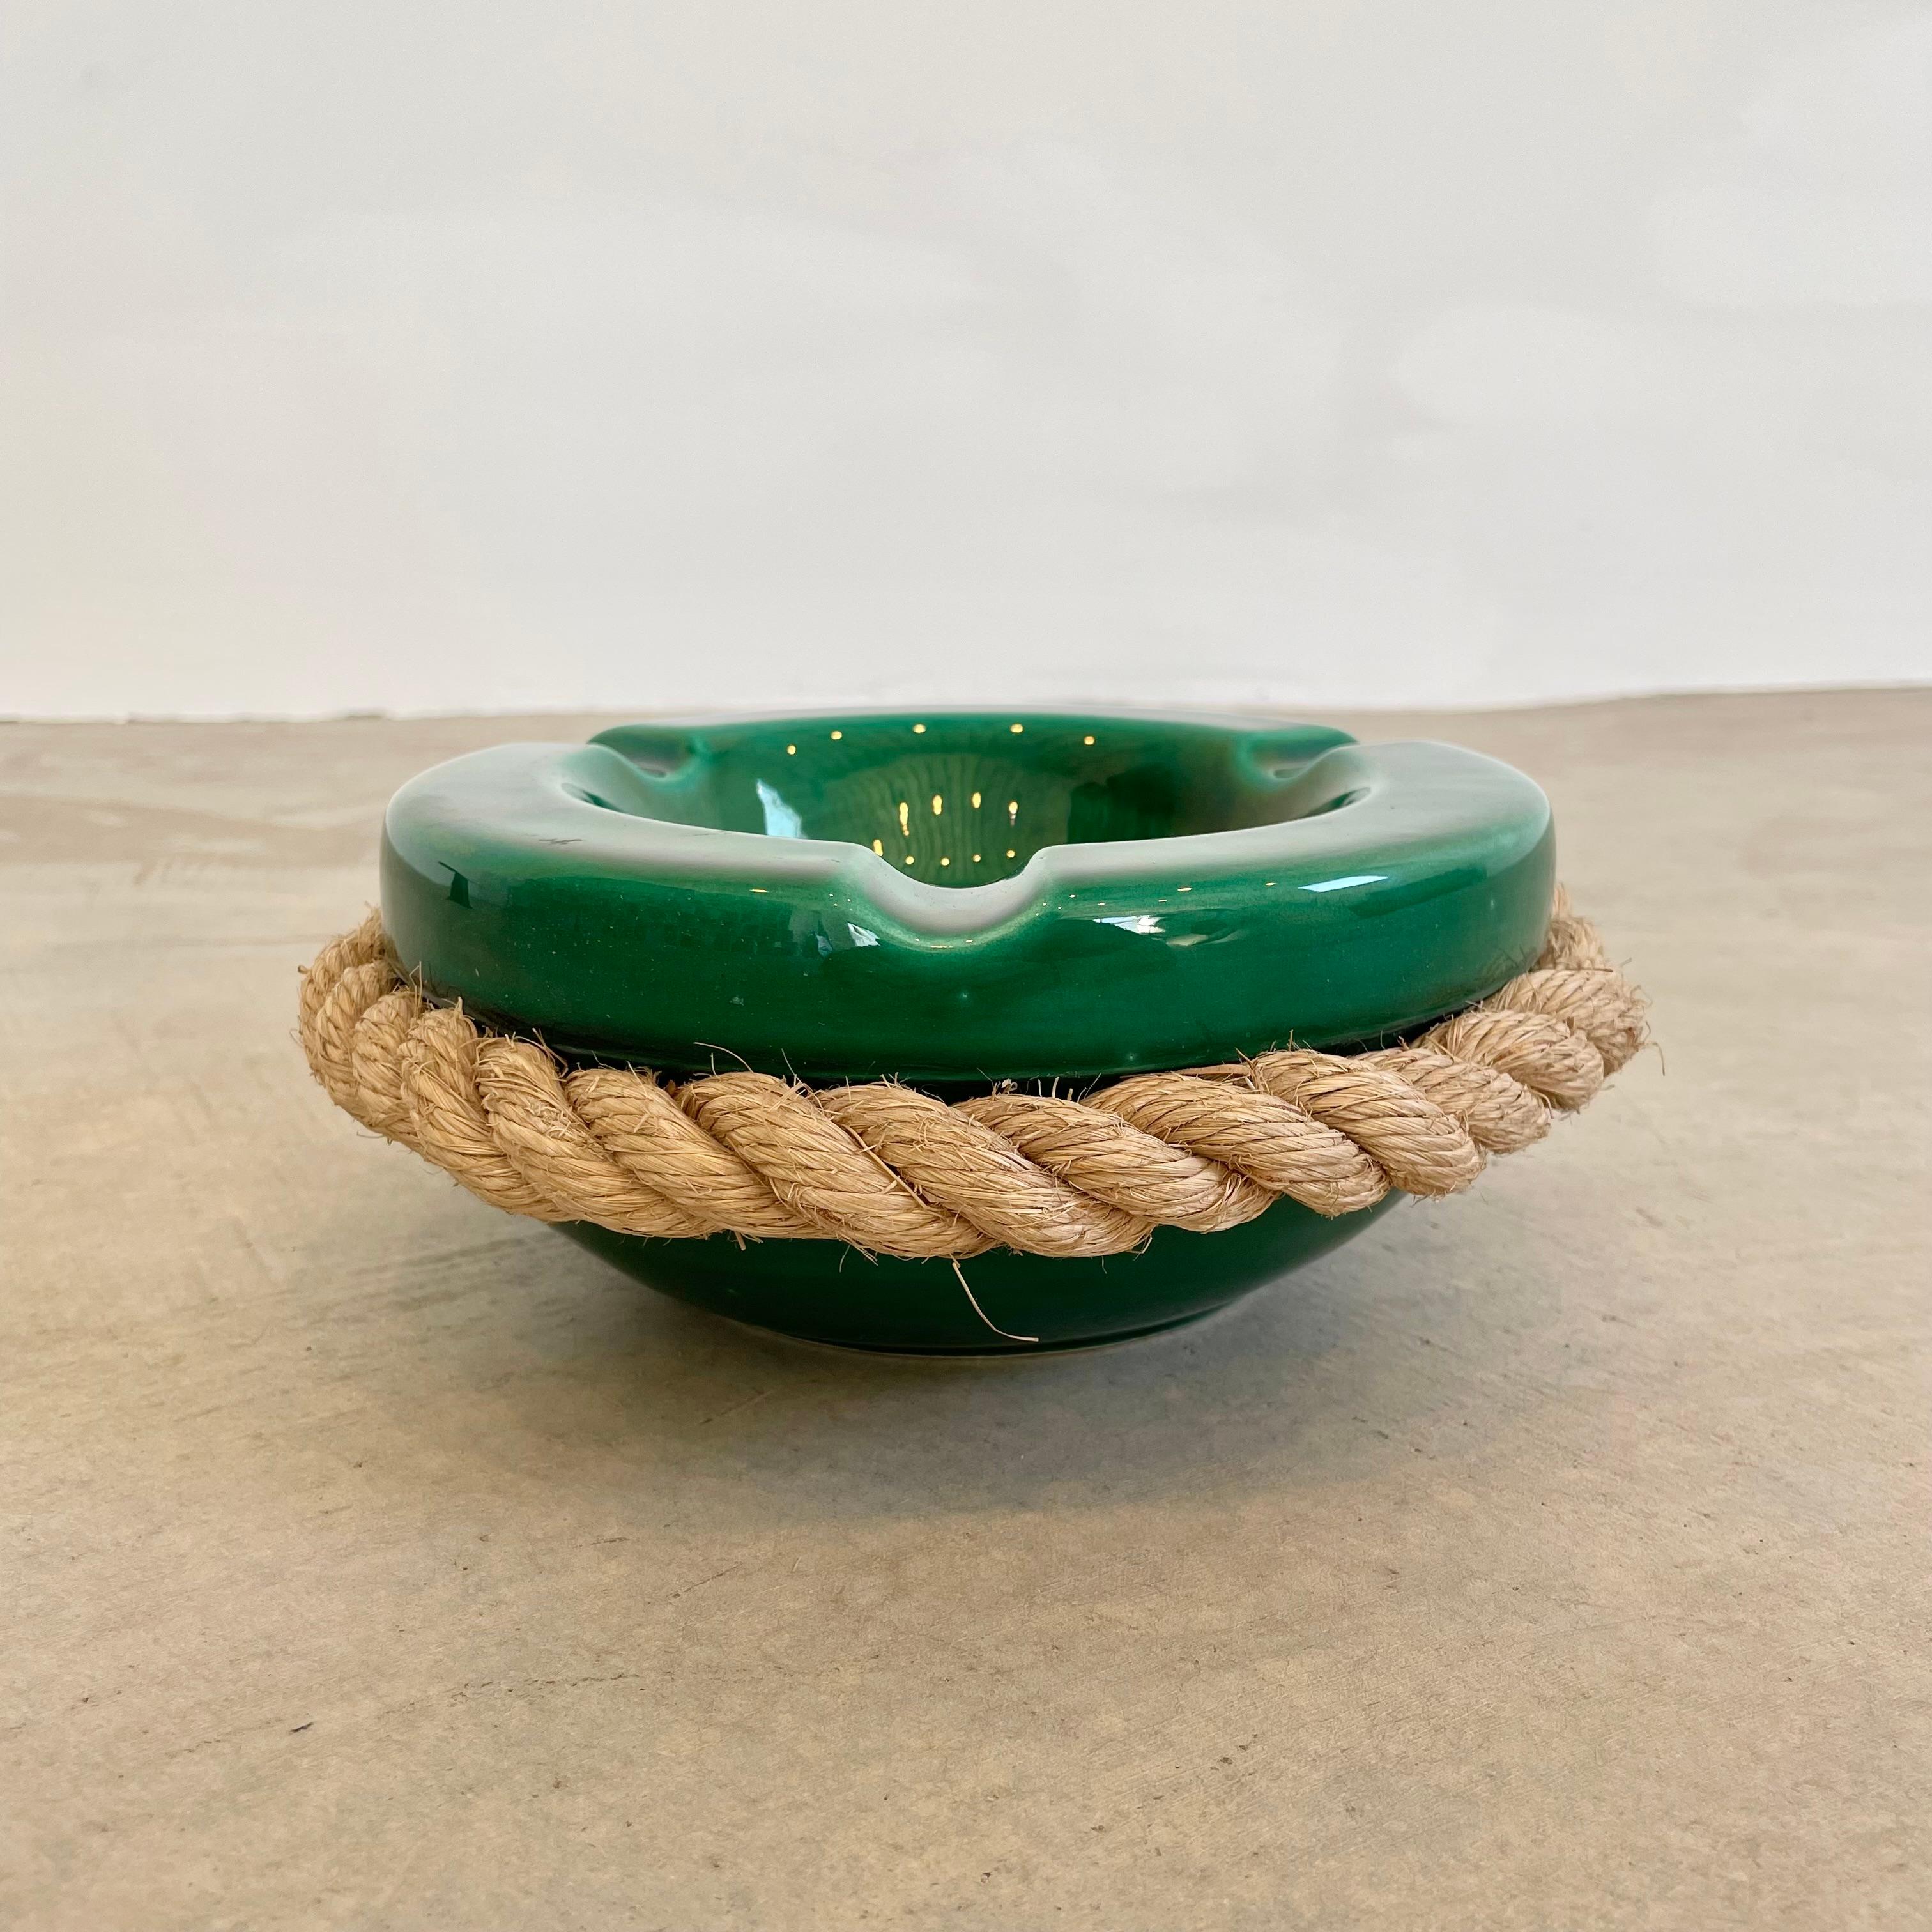 Late 20th Century Audoux Minet Style Green Ceramic Ashtray with Rope, 1970s France